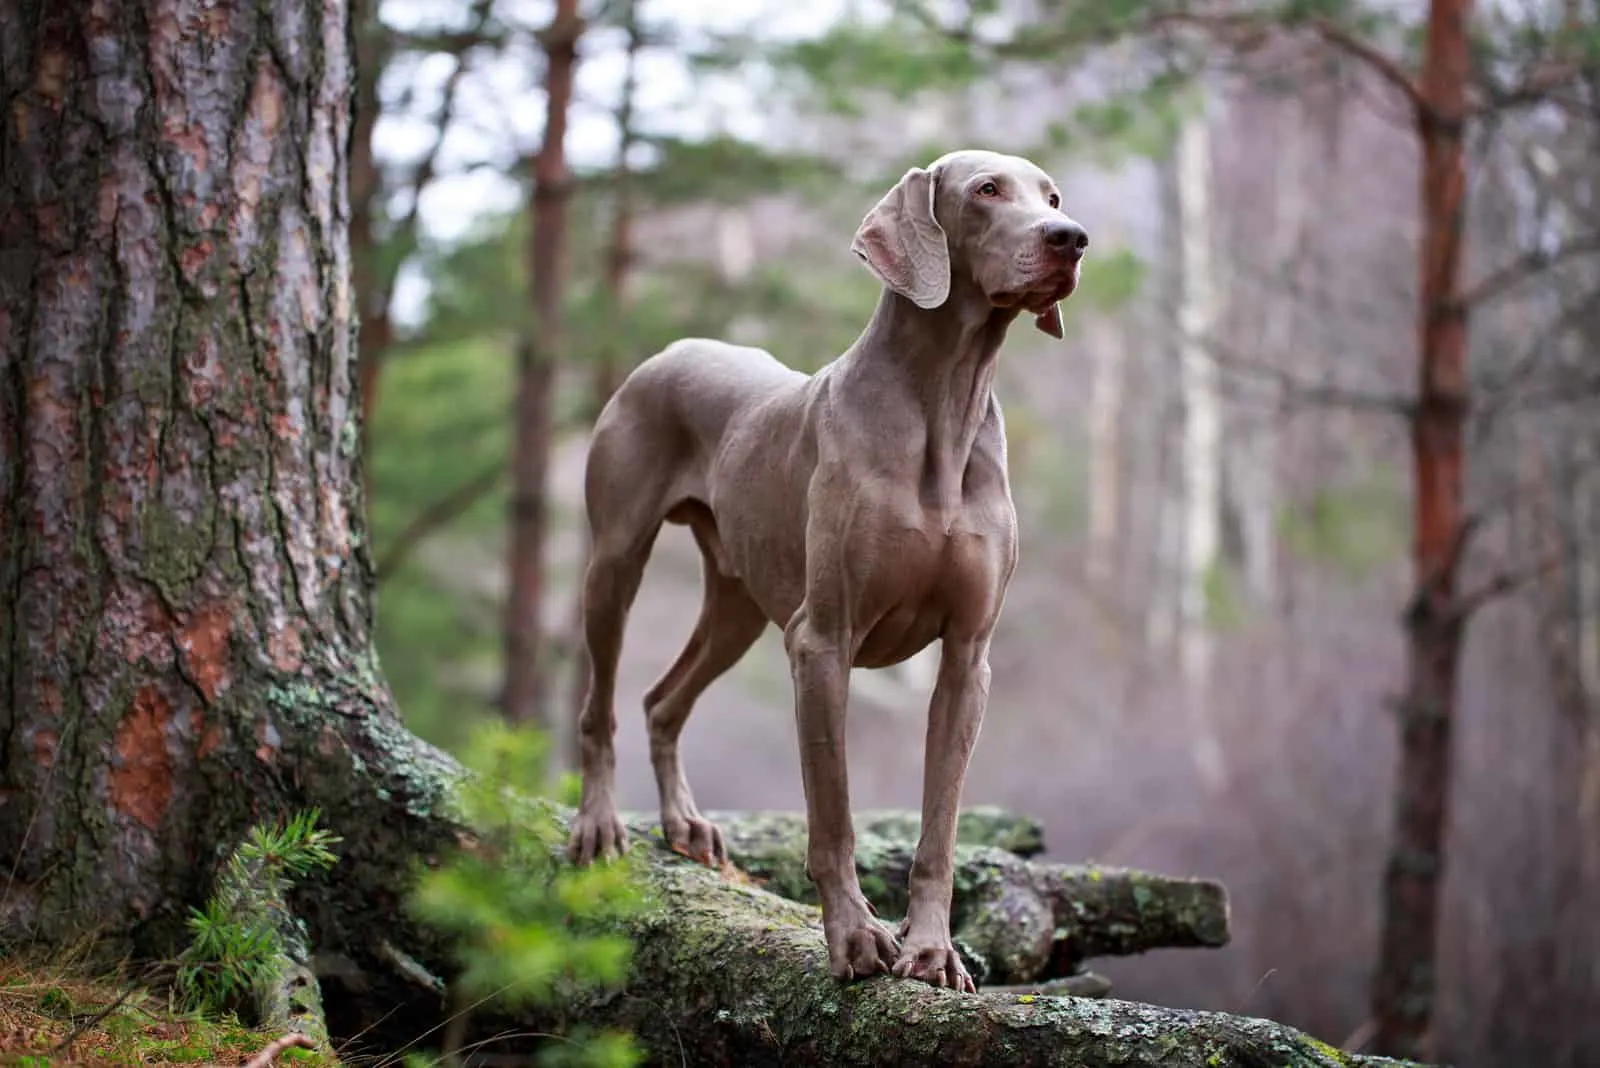 at the root of a large tree in the woods stands a weimaraner